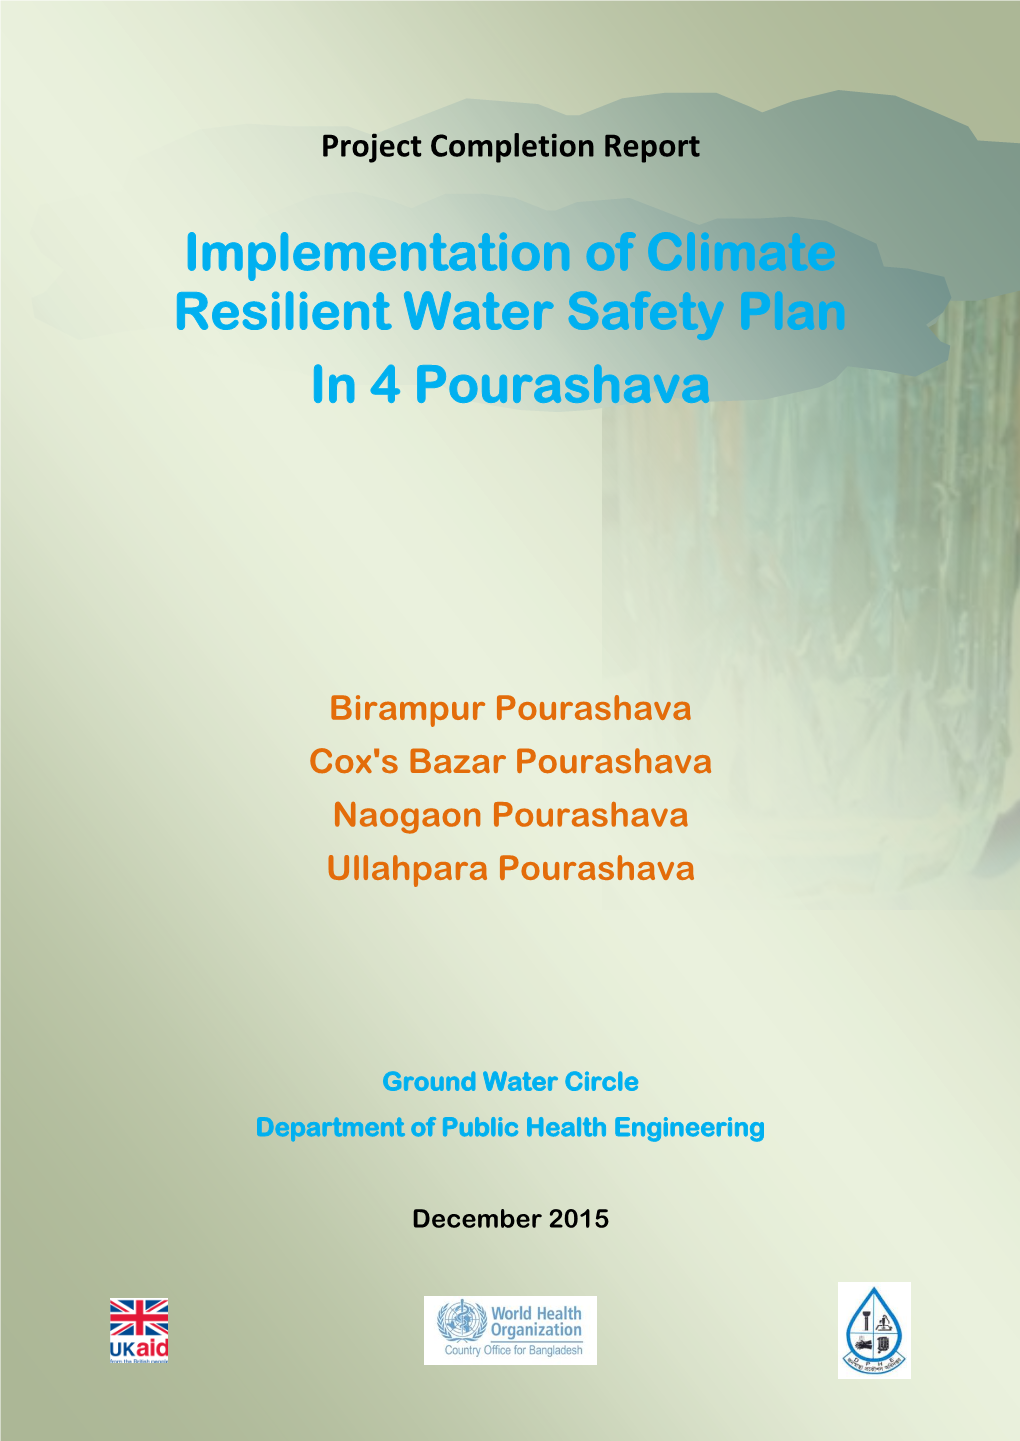 Implementation of Climate Change Resilient Water Safety Plan (WSP) in Four Pourashavas